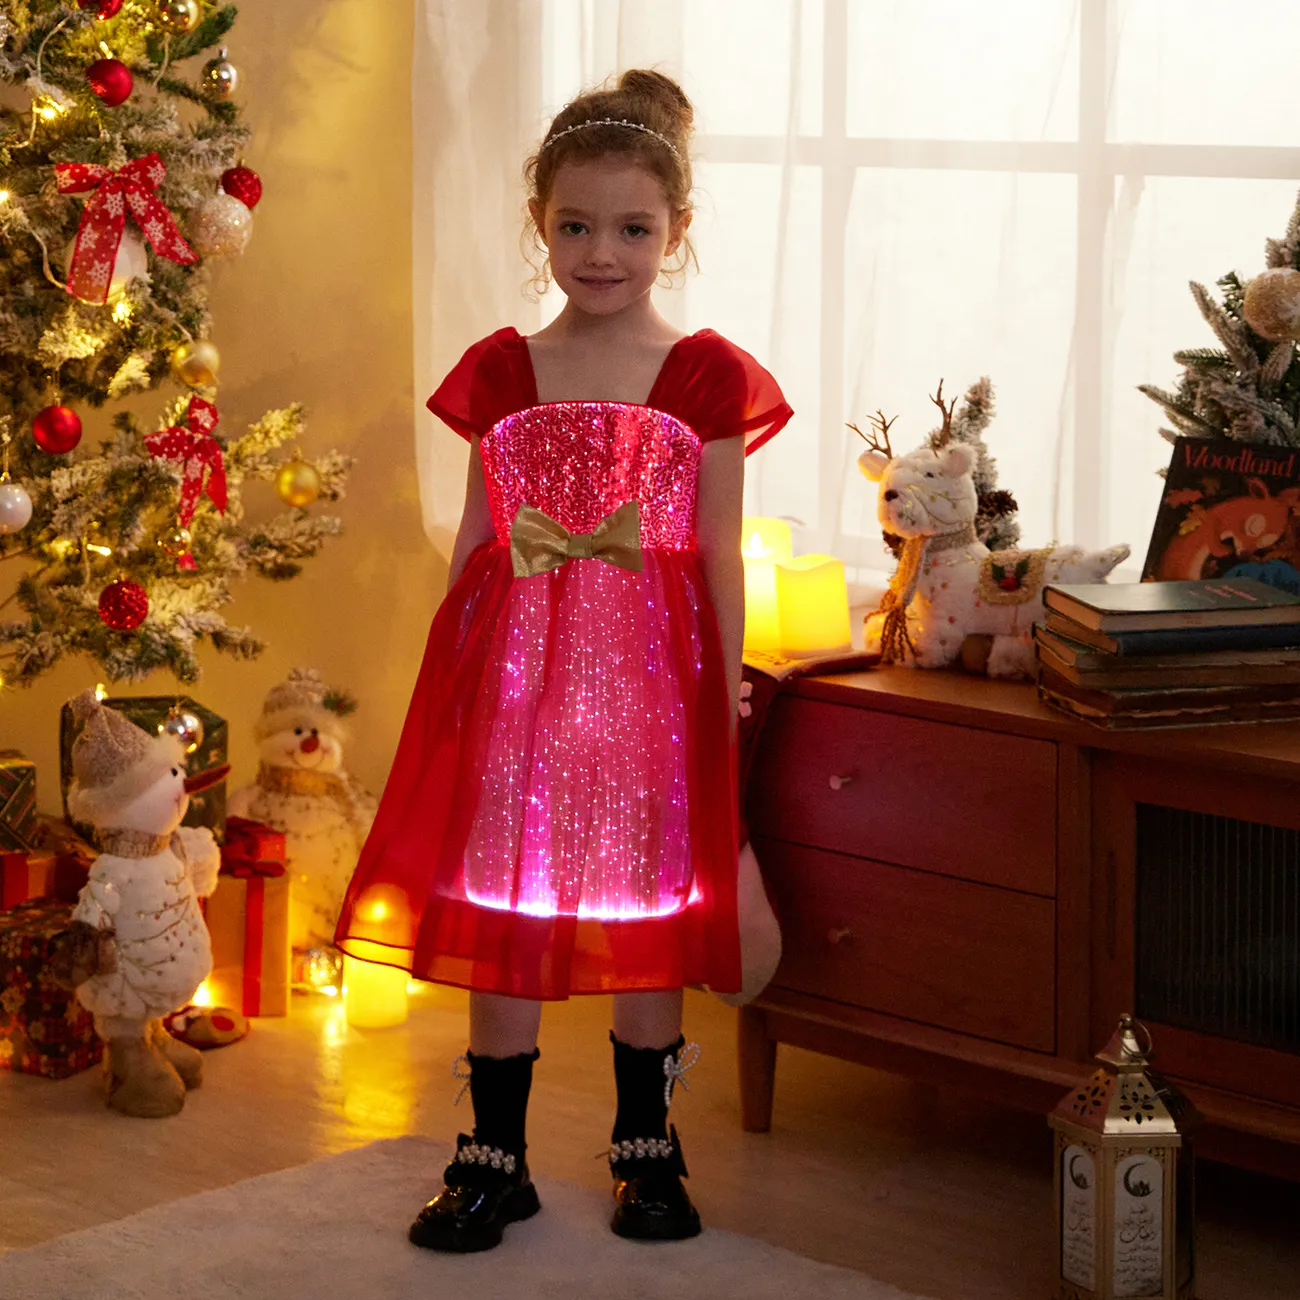 Go-Glow Christmas Illuminating Dress with Light Up Skirt Including Controller (Built-In Battery) Red big image 1